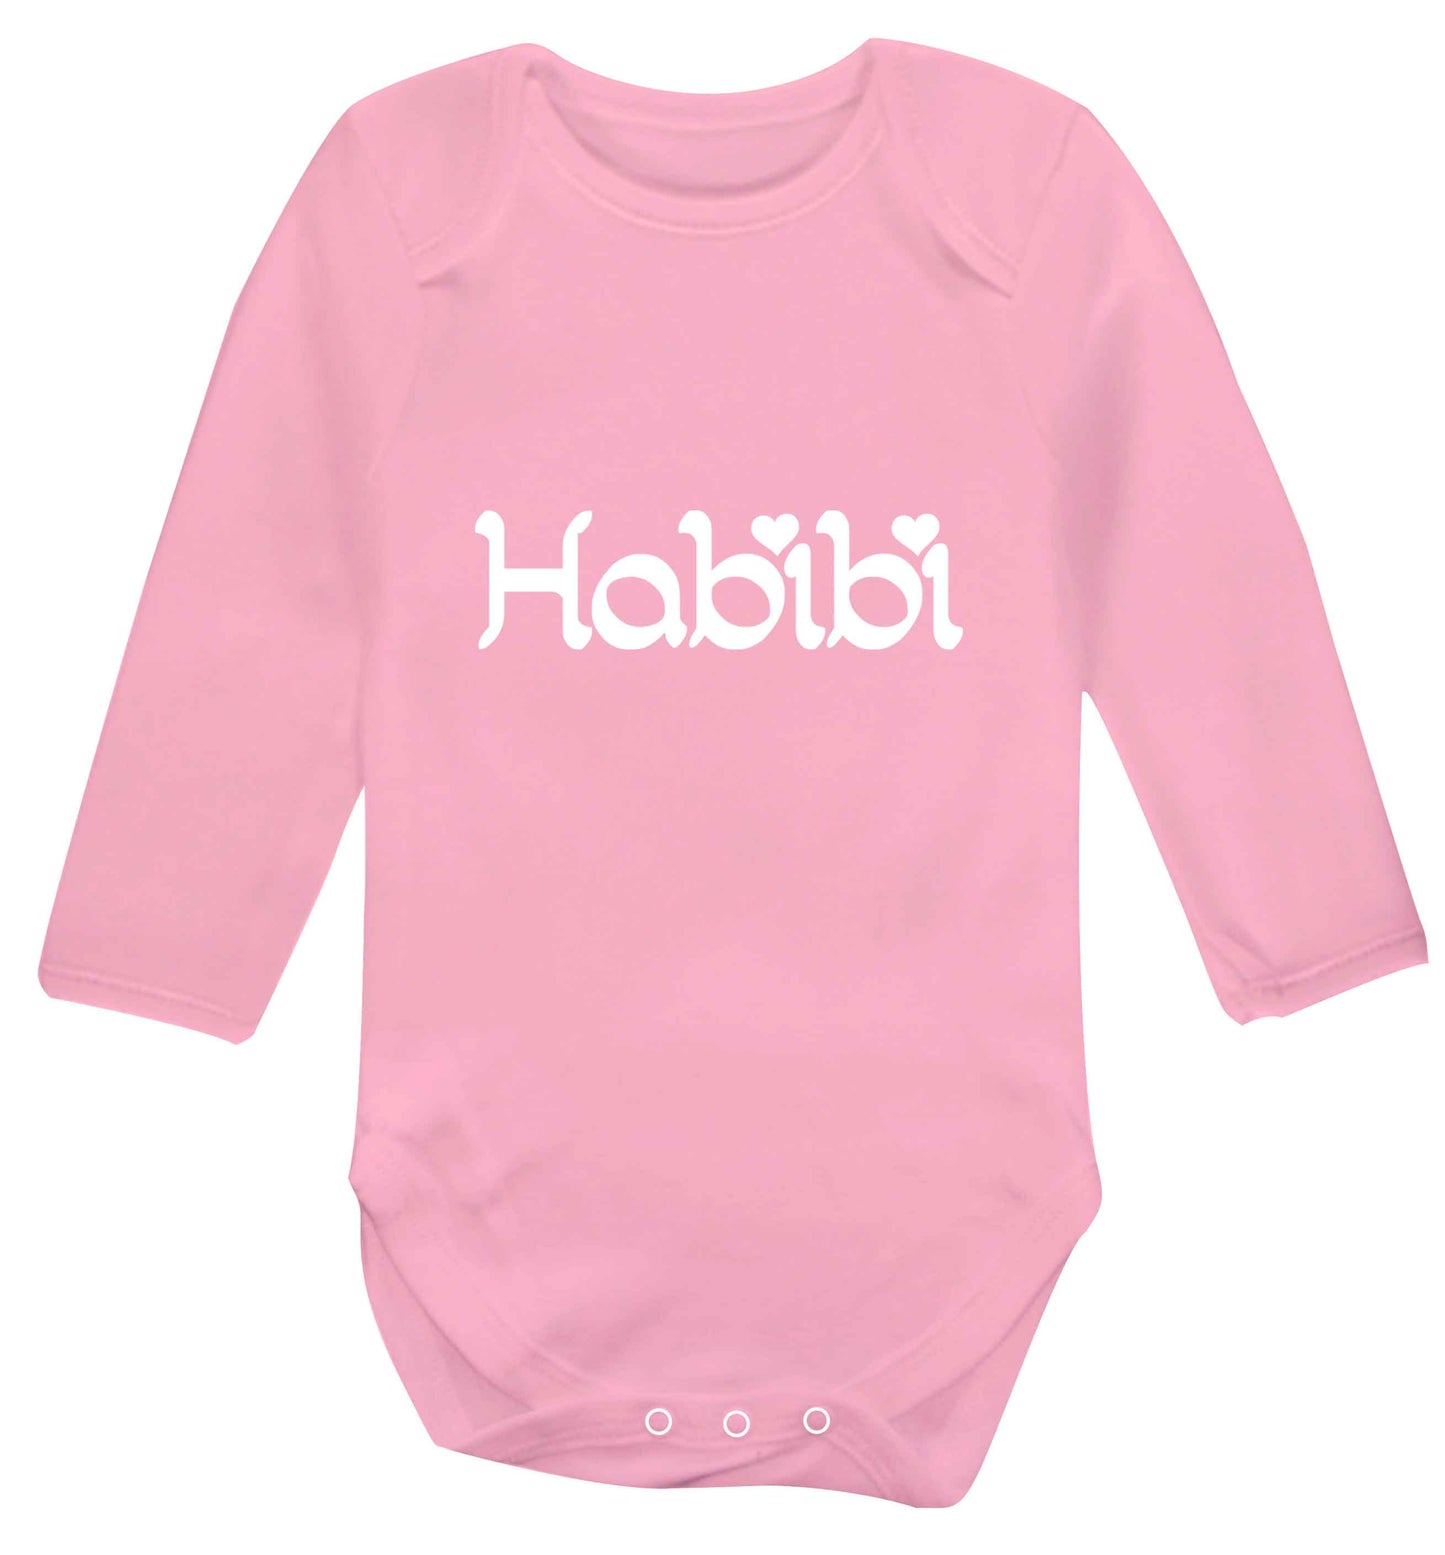 Habibi baby vest long sleeved pale pink 6-12 months